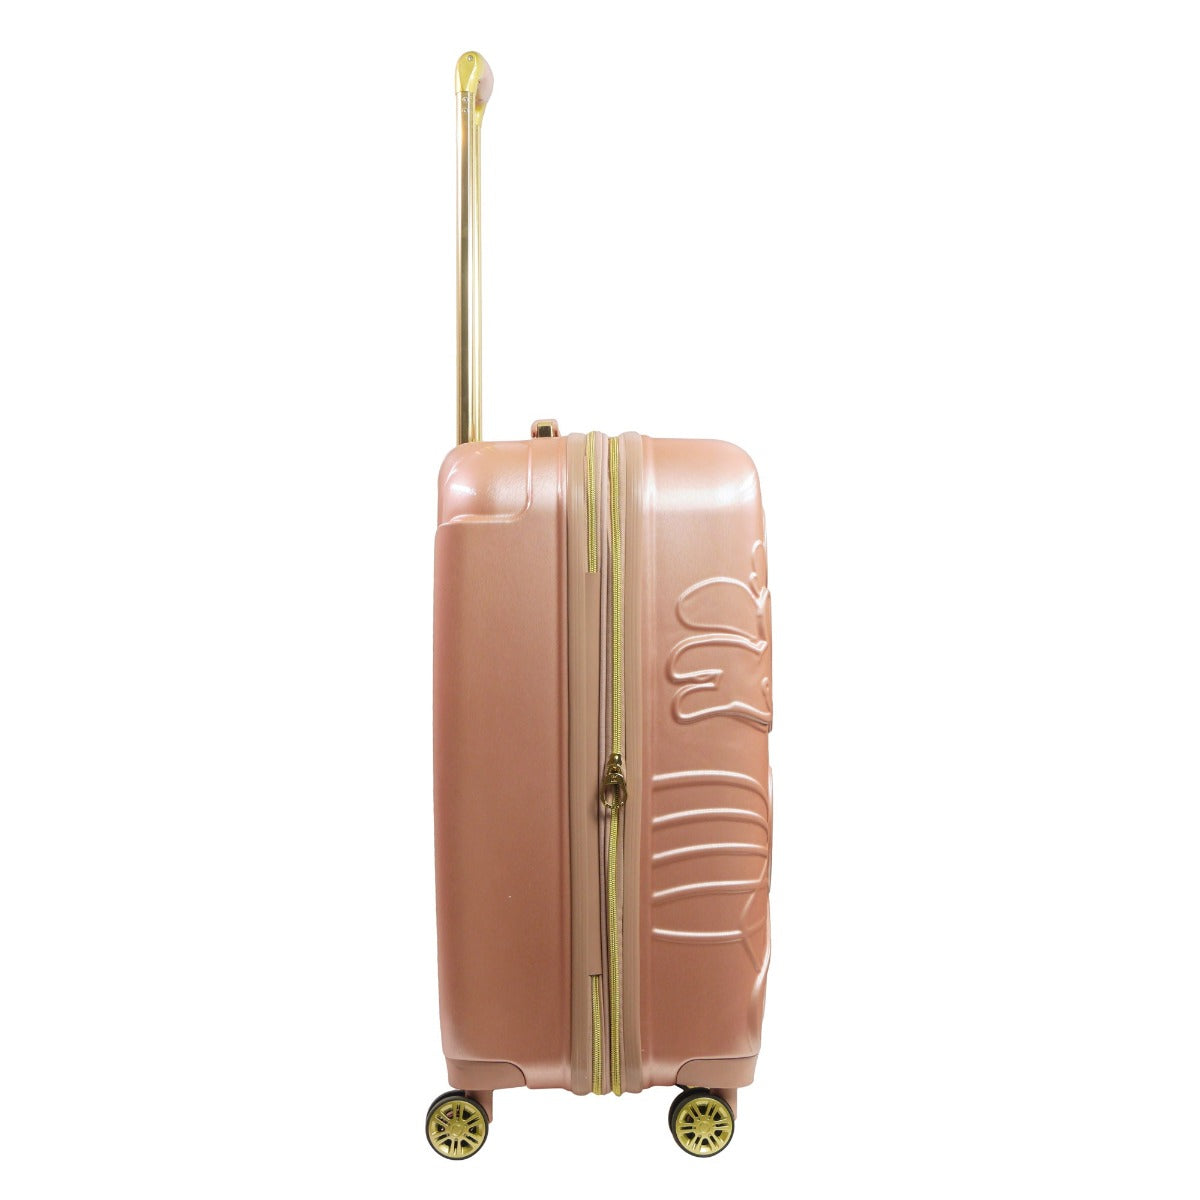 Disney Running Mickey Mouse 26" Spinner Suitcase Rose Gold Hardsided checked luggage